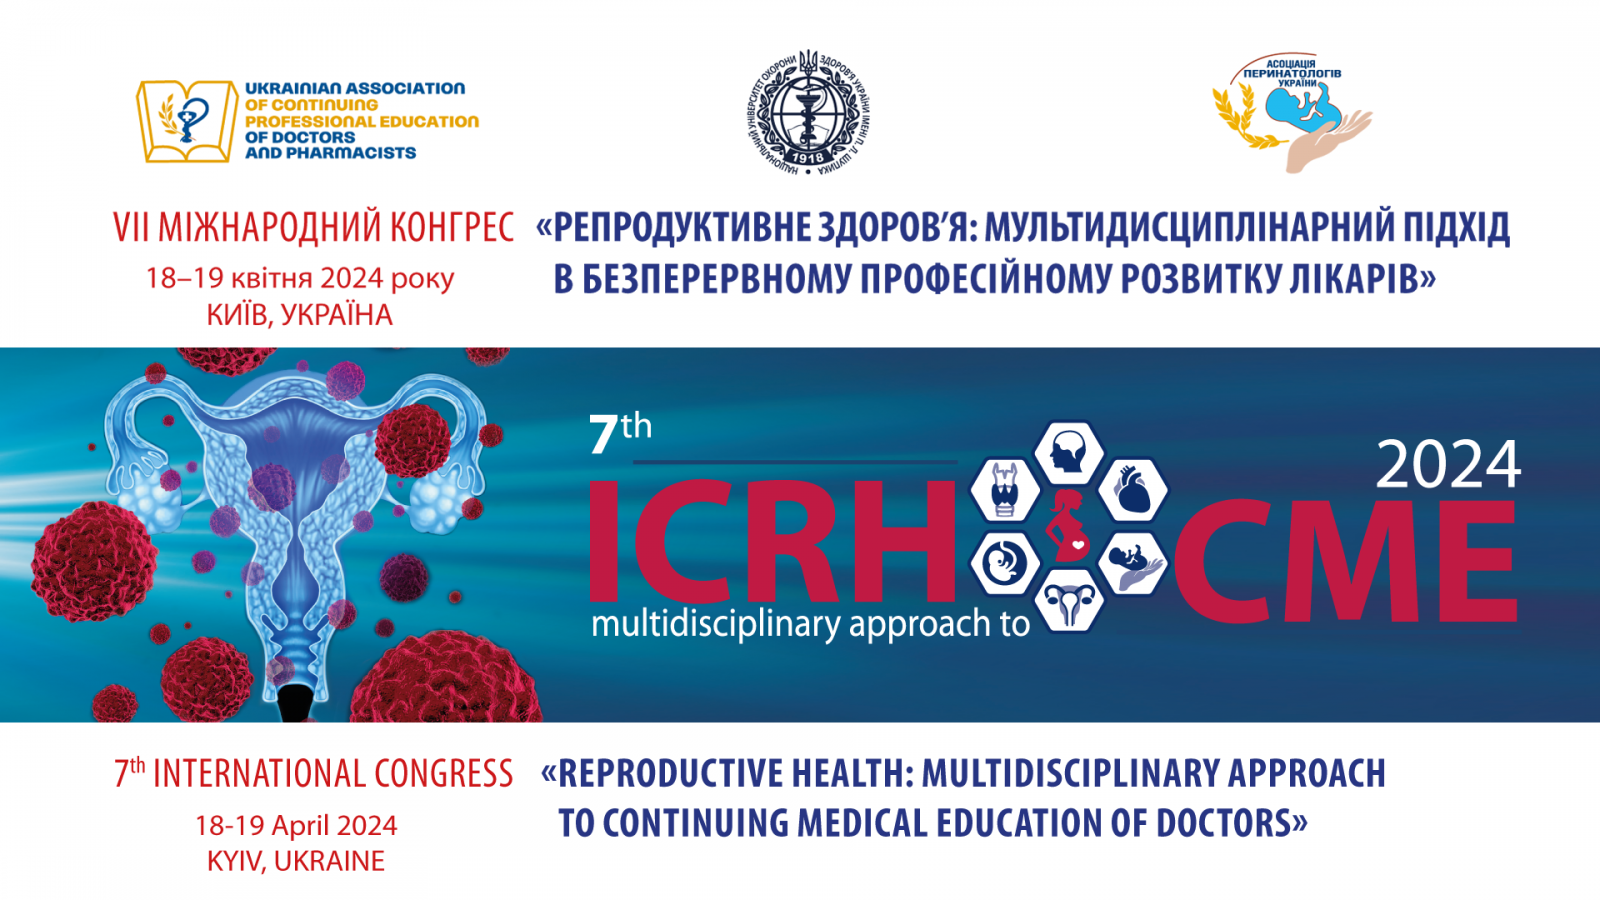 VII INTERNATIONAL CONGRESS REPRODUCTIVE HEALTH: a multidisciplinary approach in the continuing professional development of physicians